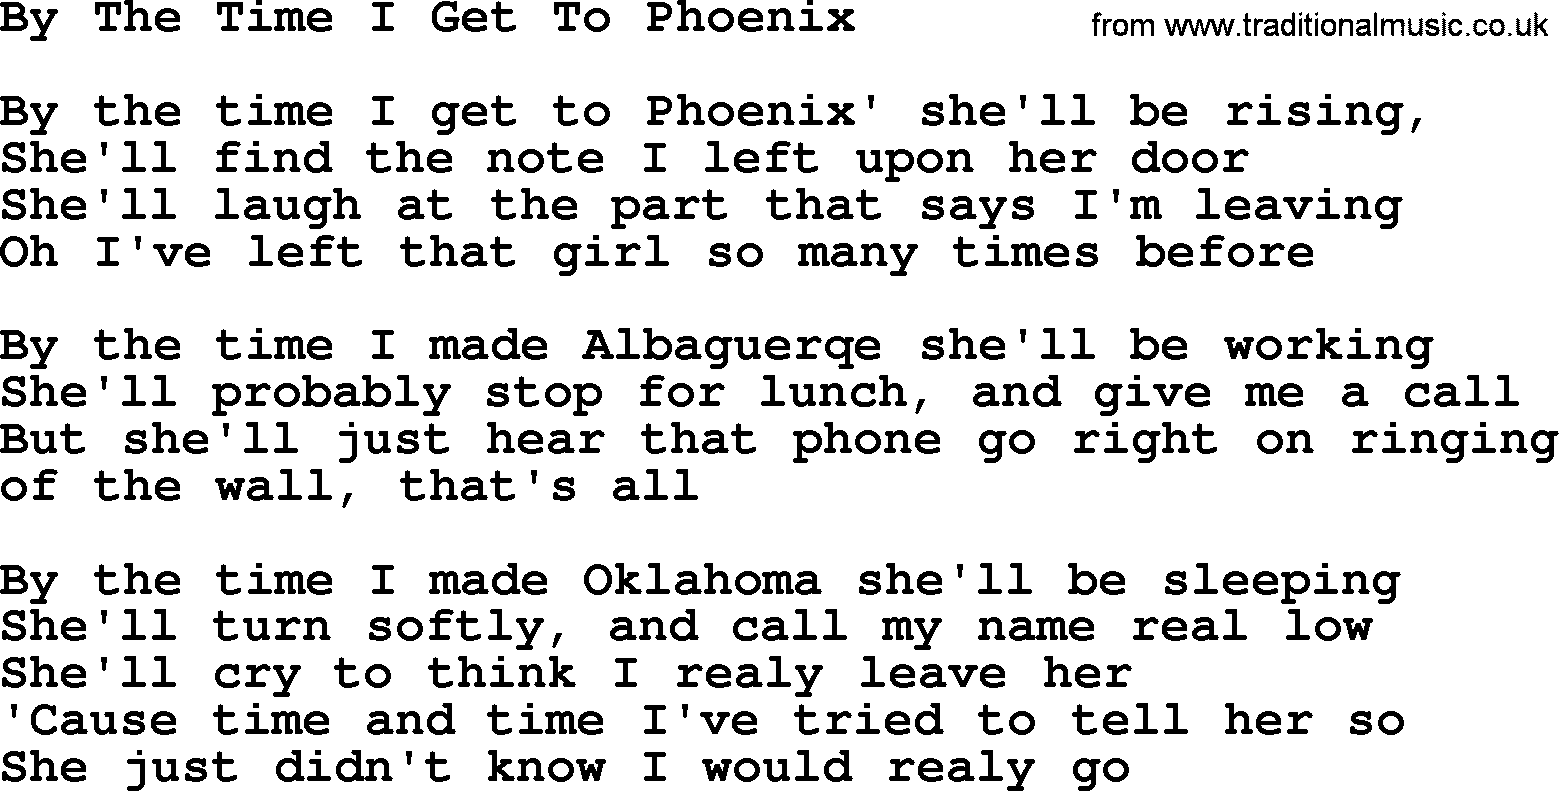 Marty Robbins song: By The Time I Get To Phoenix, lyrics